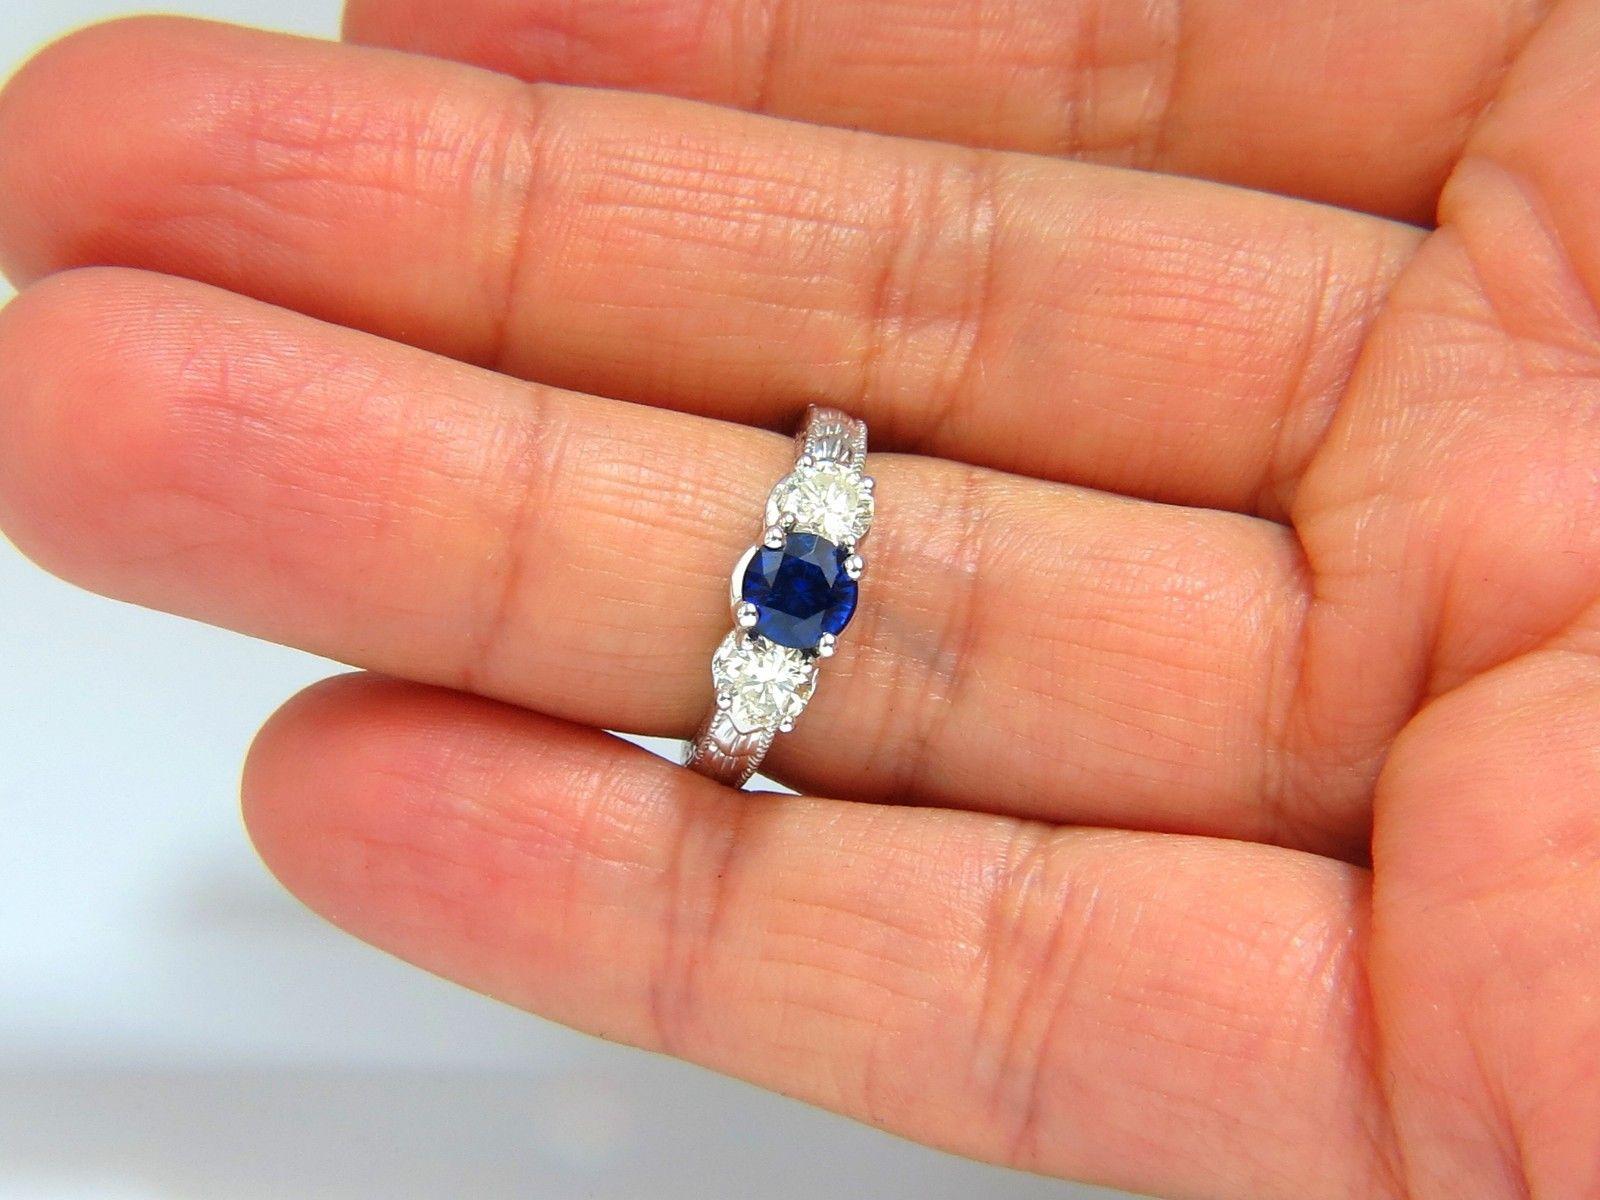 Ladies round shaped sapphire ring, three stone classic

Gorgeous Edwardian Era Gilt Deco on Shank

1.14ct. Natural Blue Sapphire

5.8mm diameter

Full cut round brilliant 

Clean Clarity & Transparent

.90ct. Diamonds.

J-color Si-1-2 clarity.

 